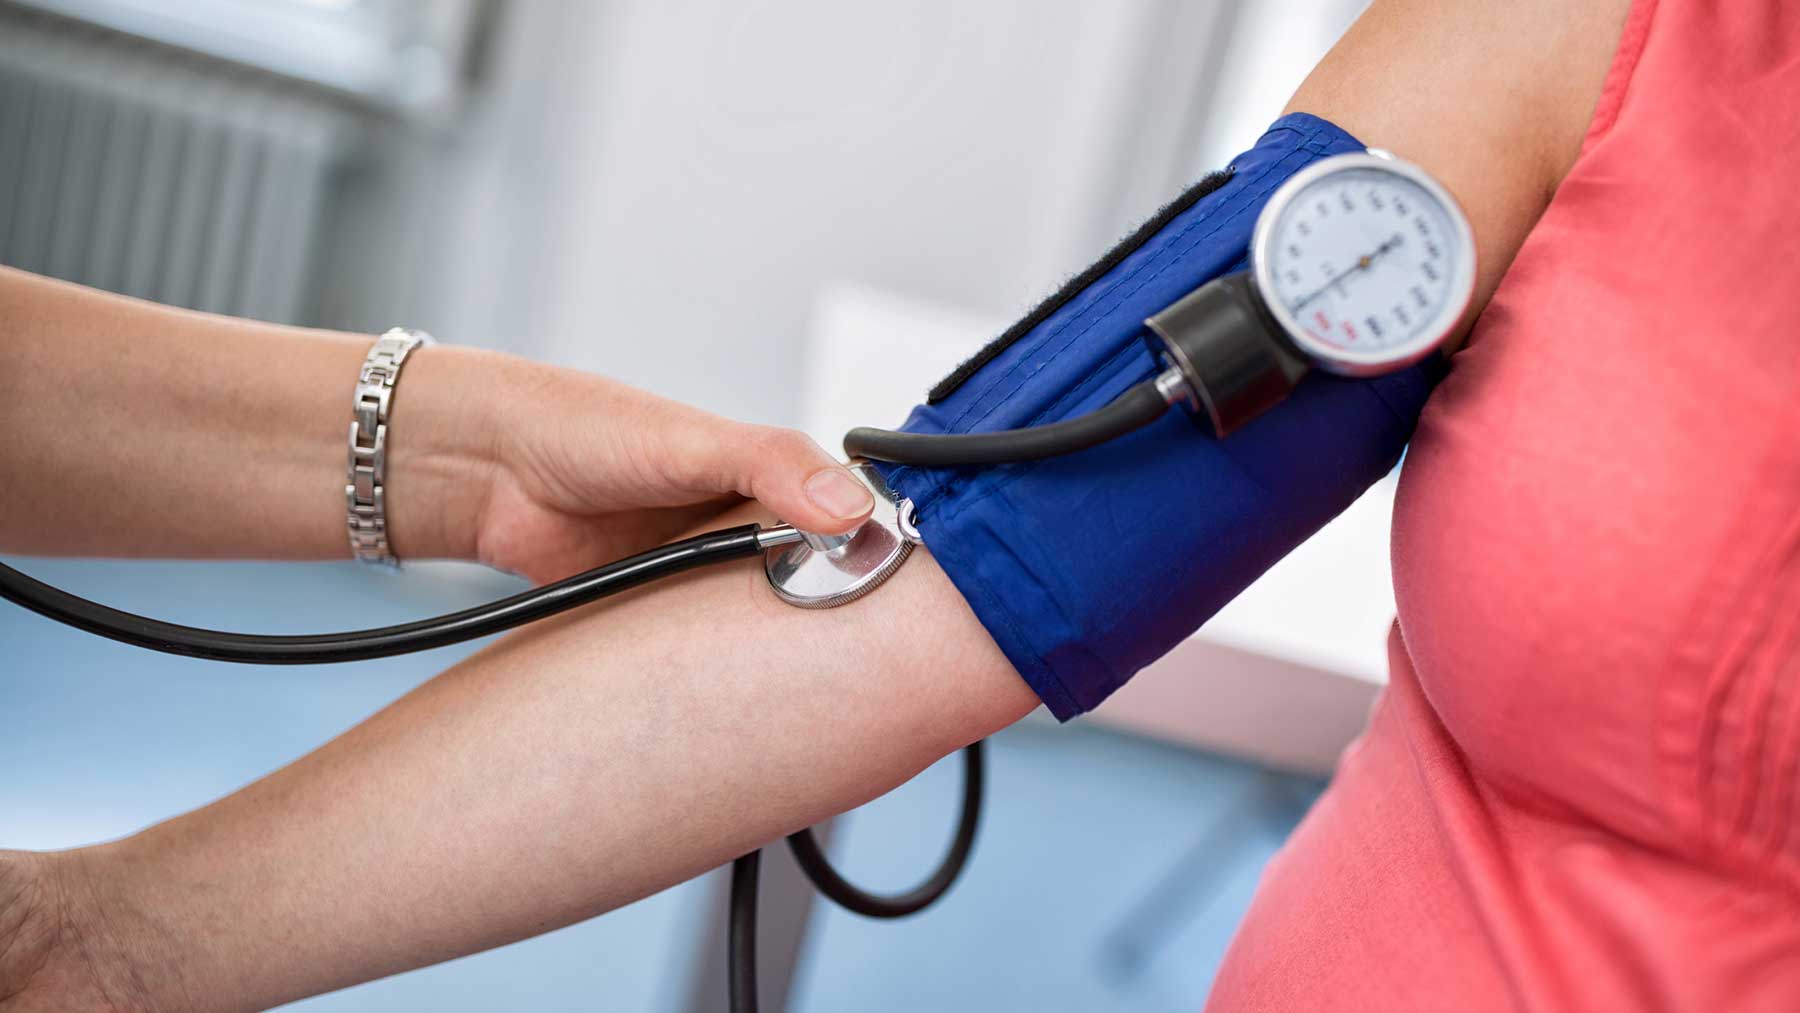 Six ways to lower your blood pressure